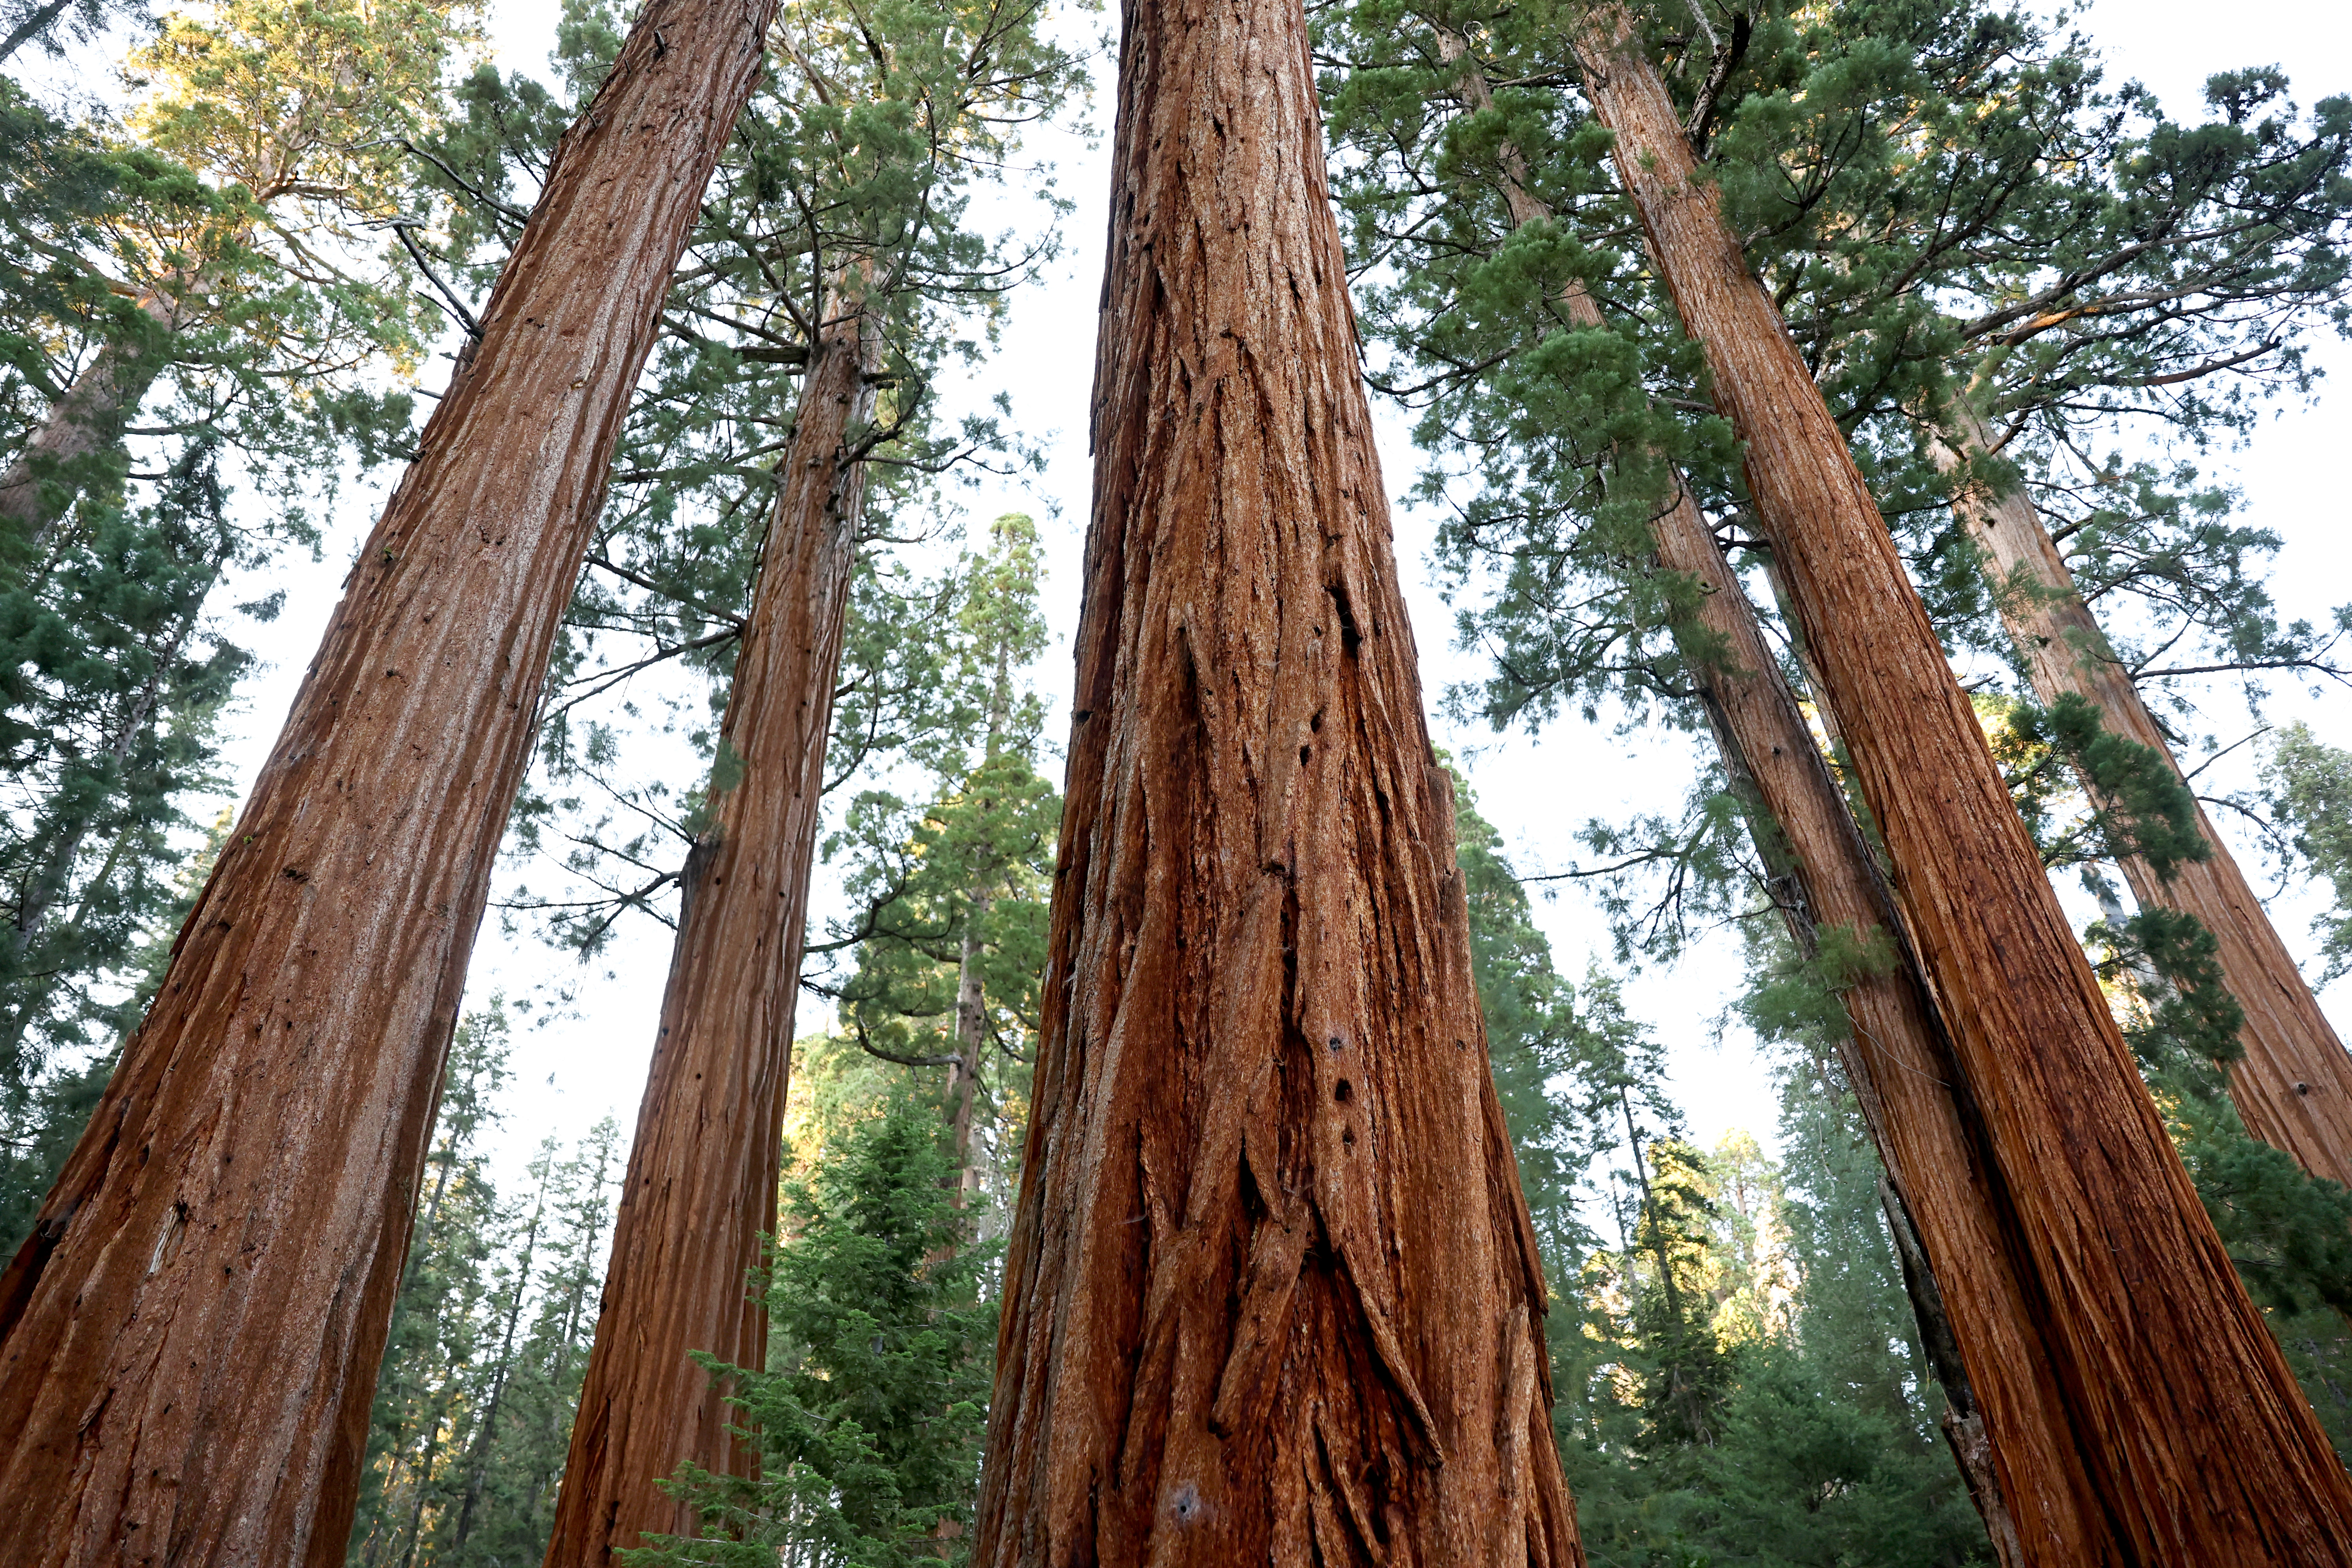 Giant sequoia trees photographed from below, at Sequoia National Park in California